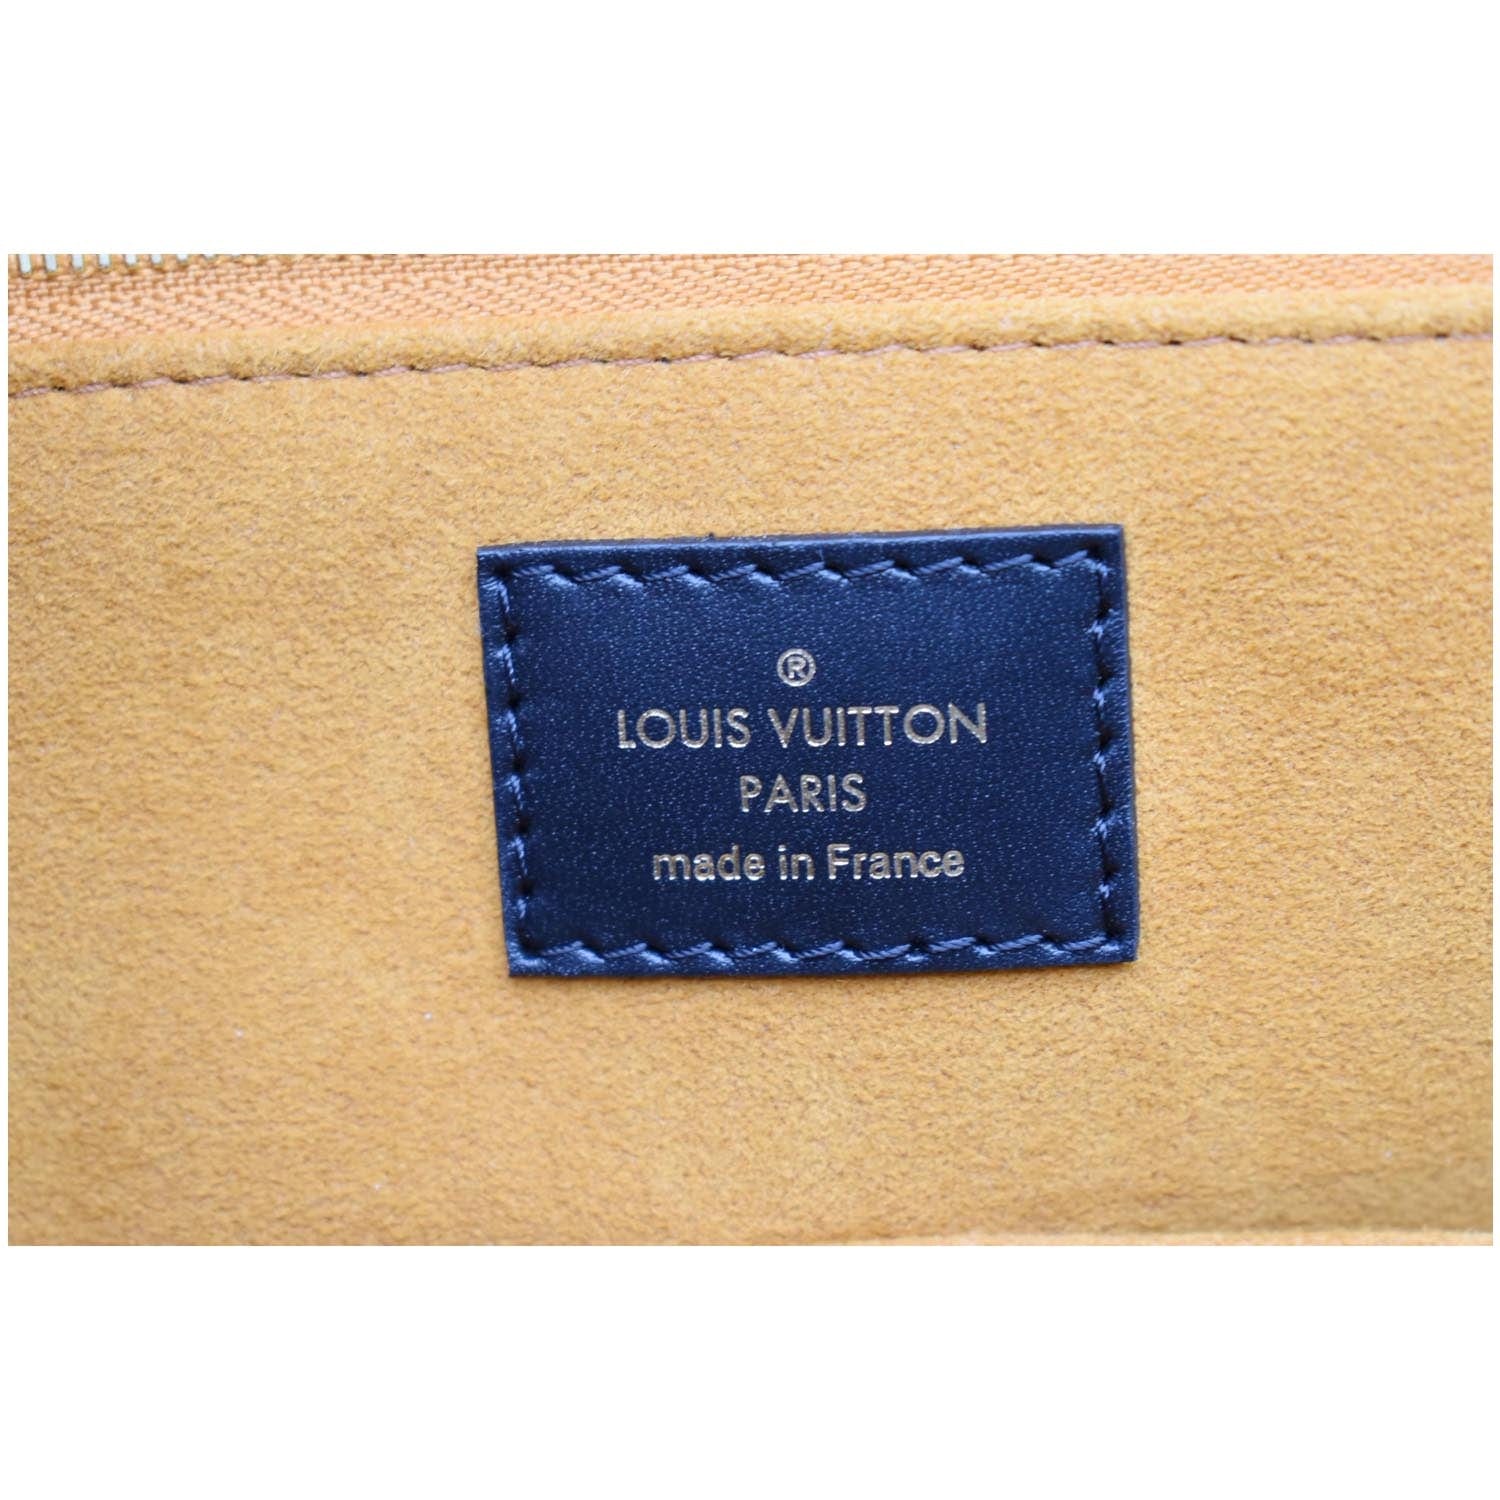 Louis Vuitton OnTheGo GM, Brown Empreinte Leather, Preowned in Box WA001